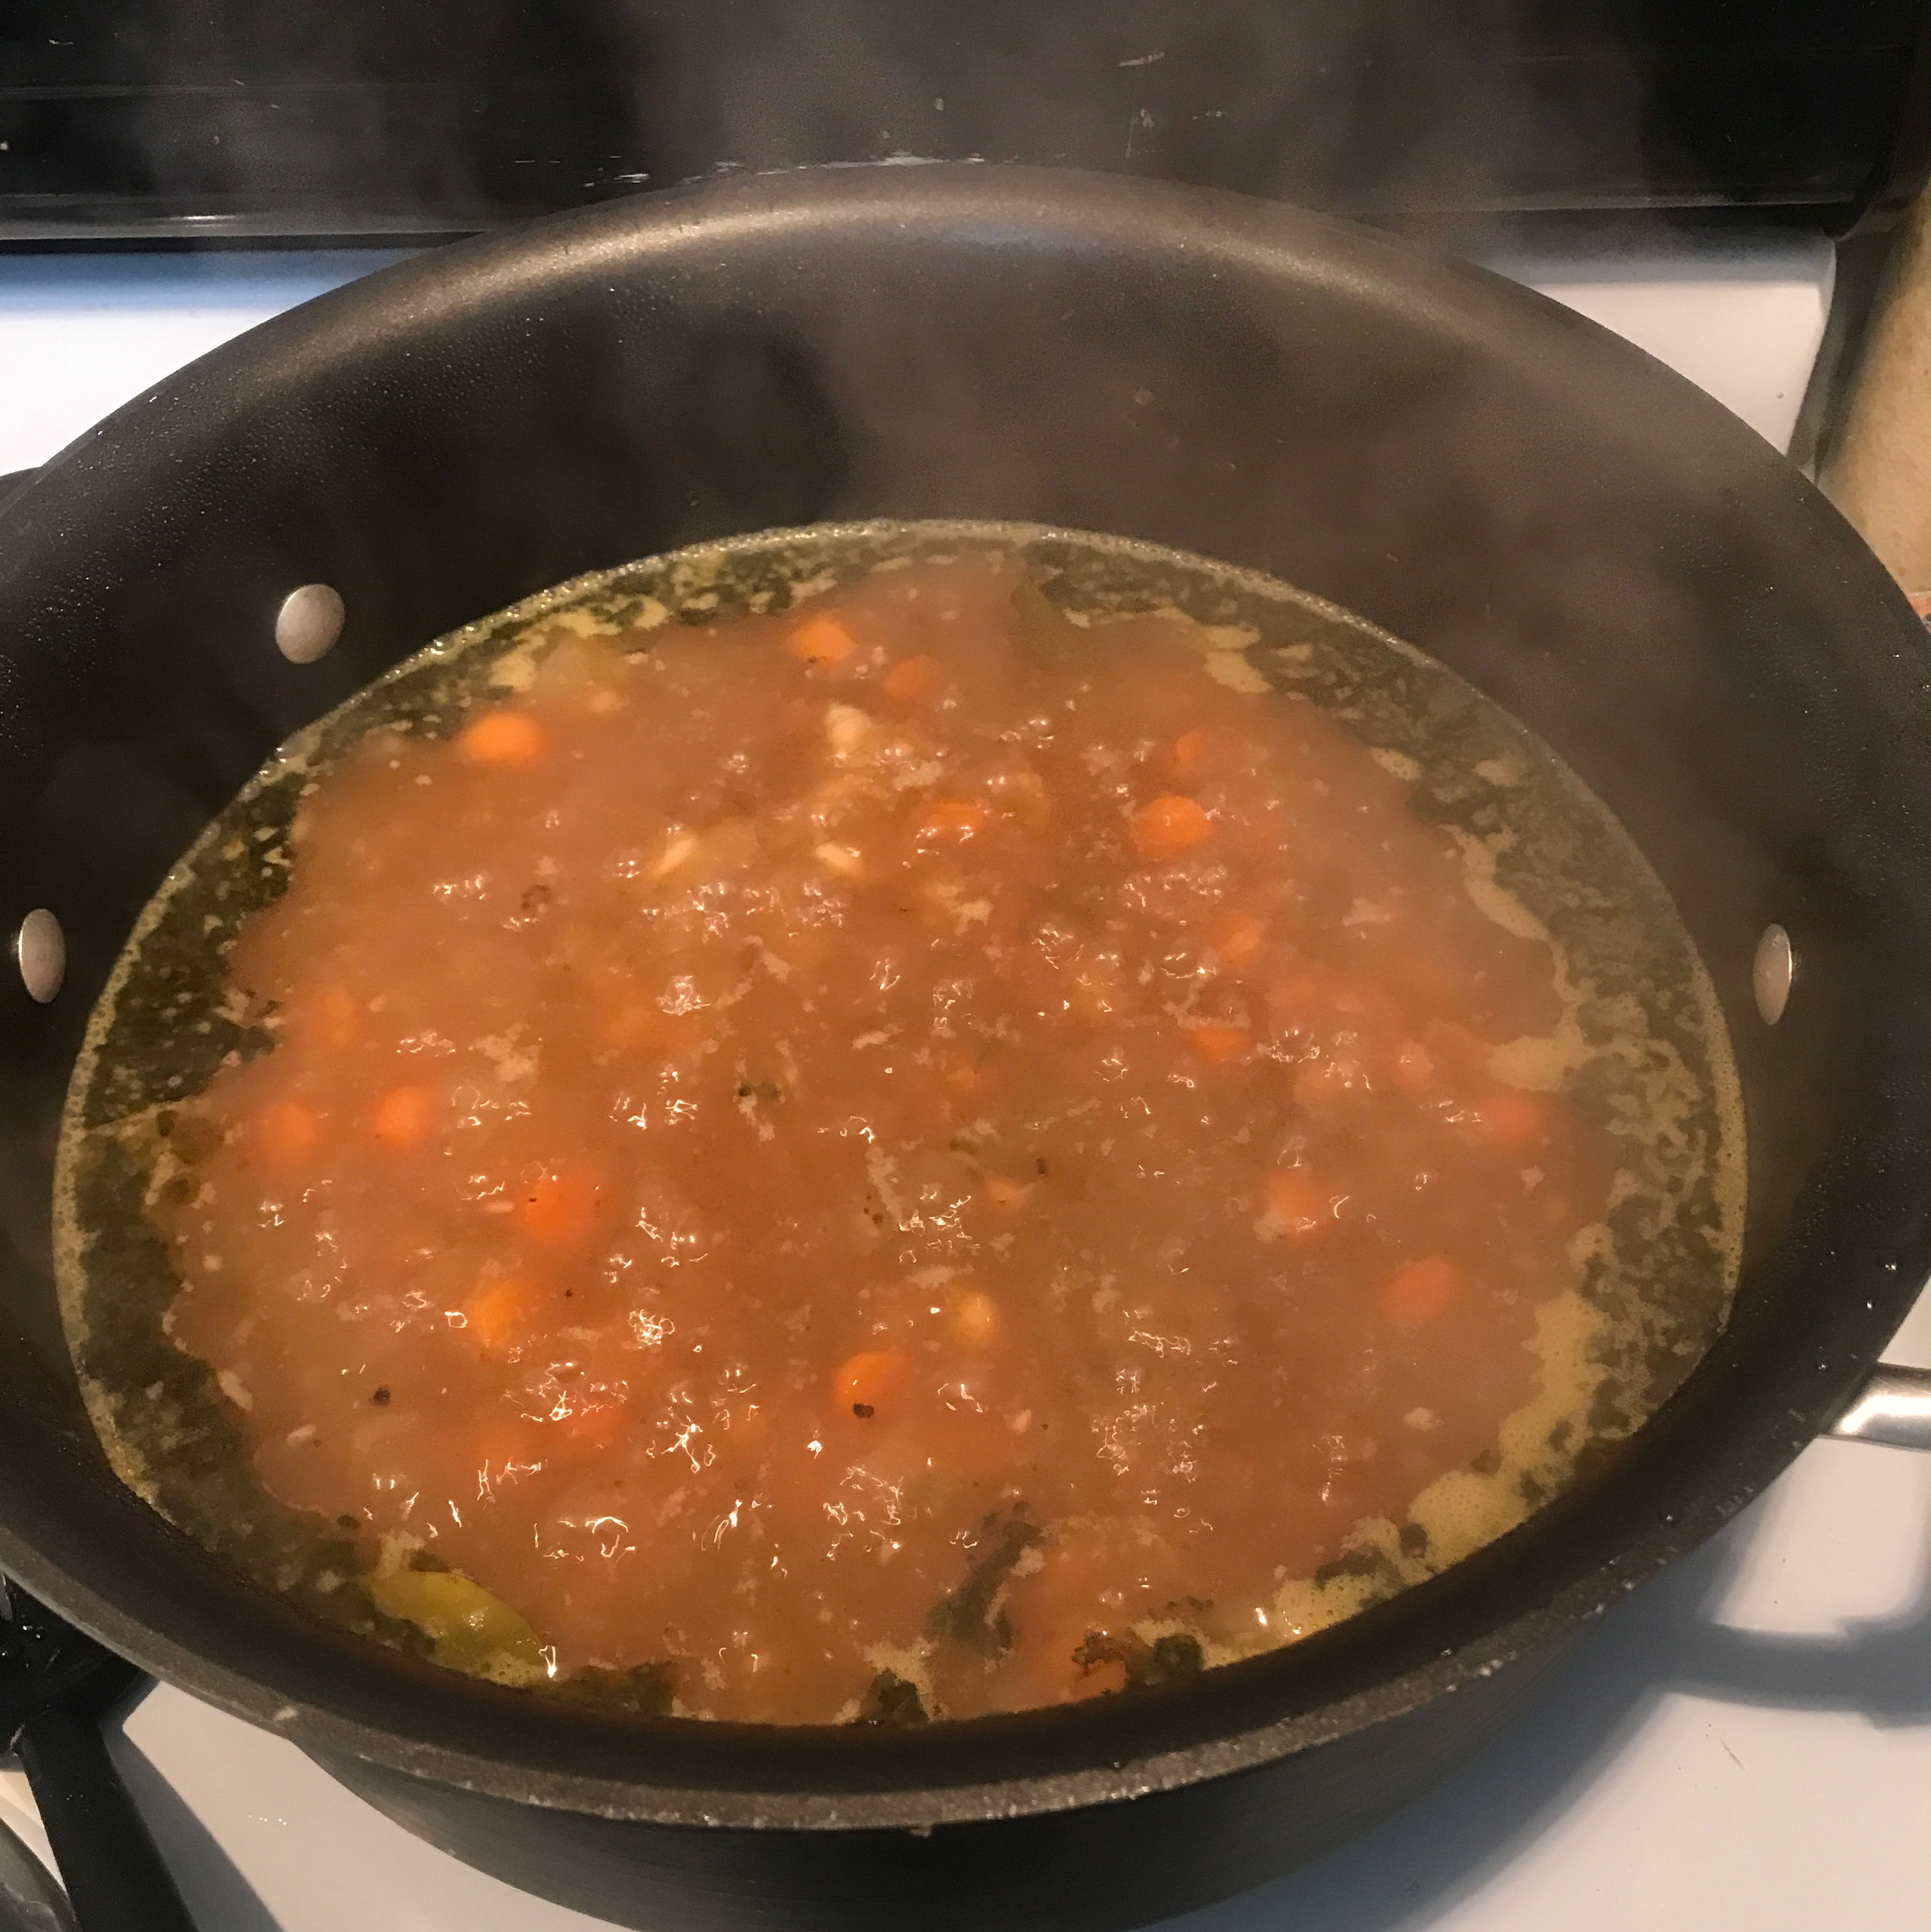 Great Northern Bean Soup 